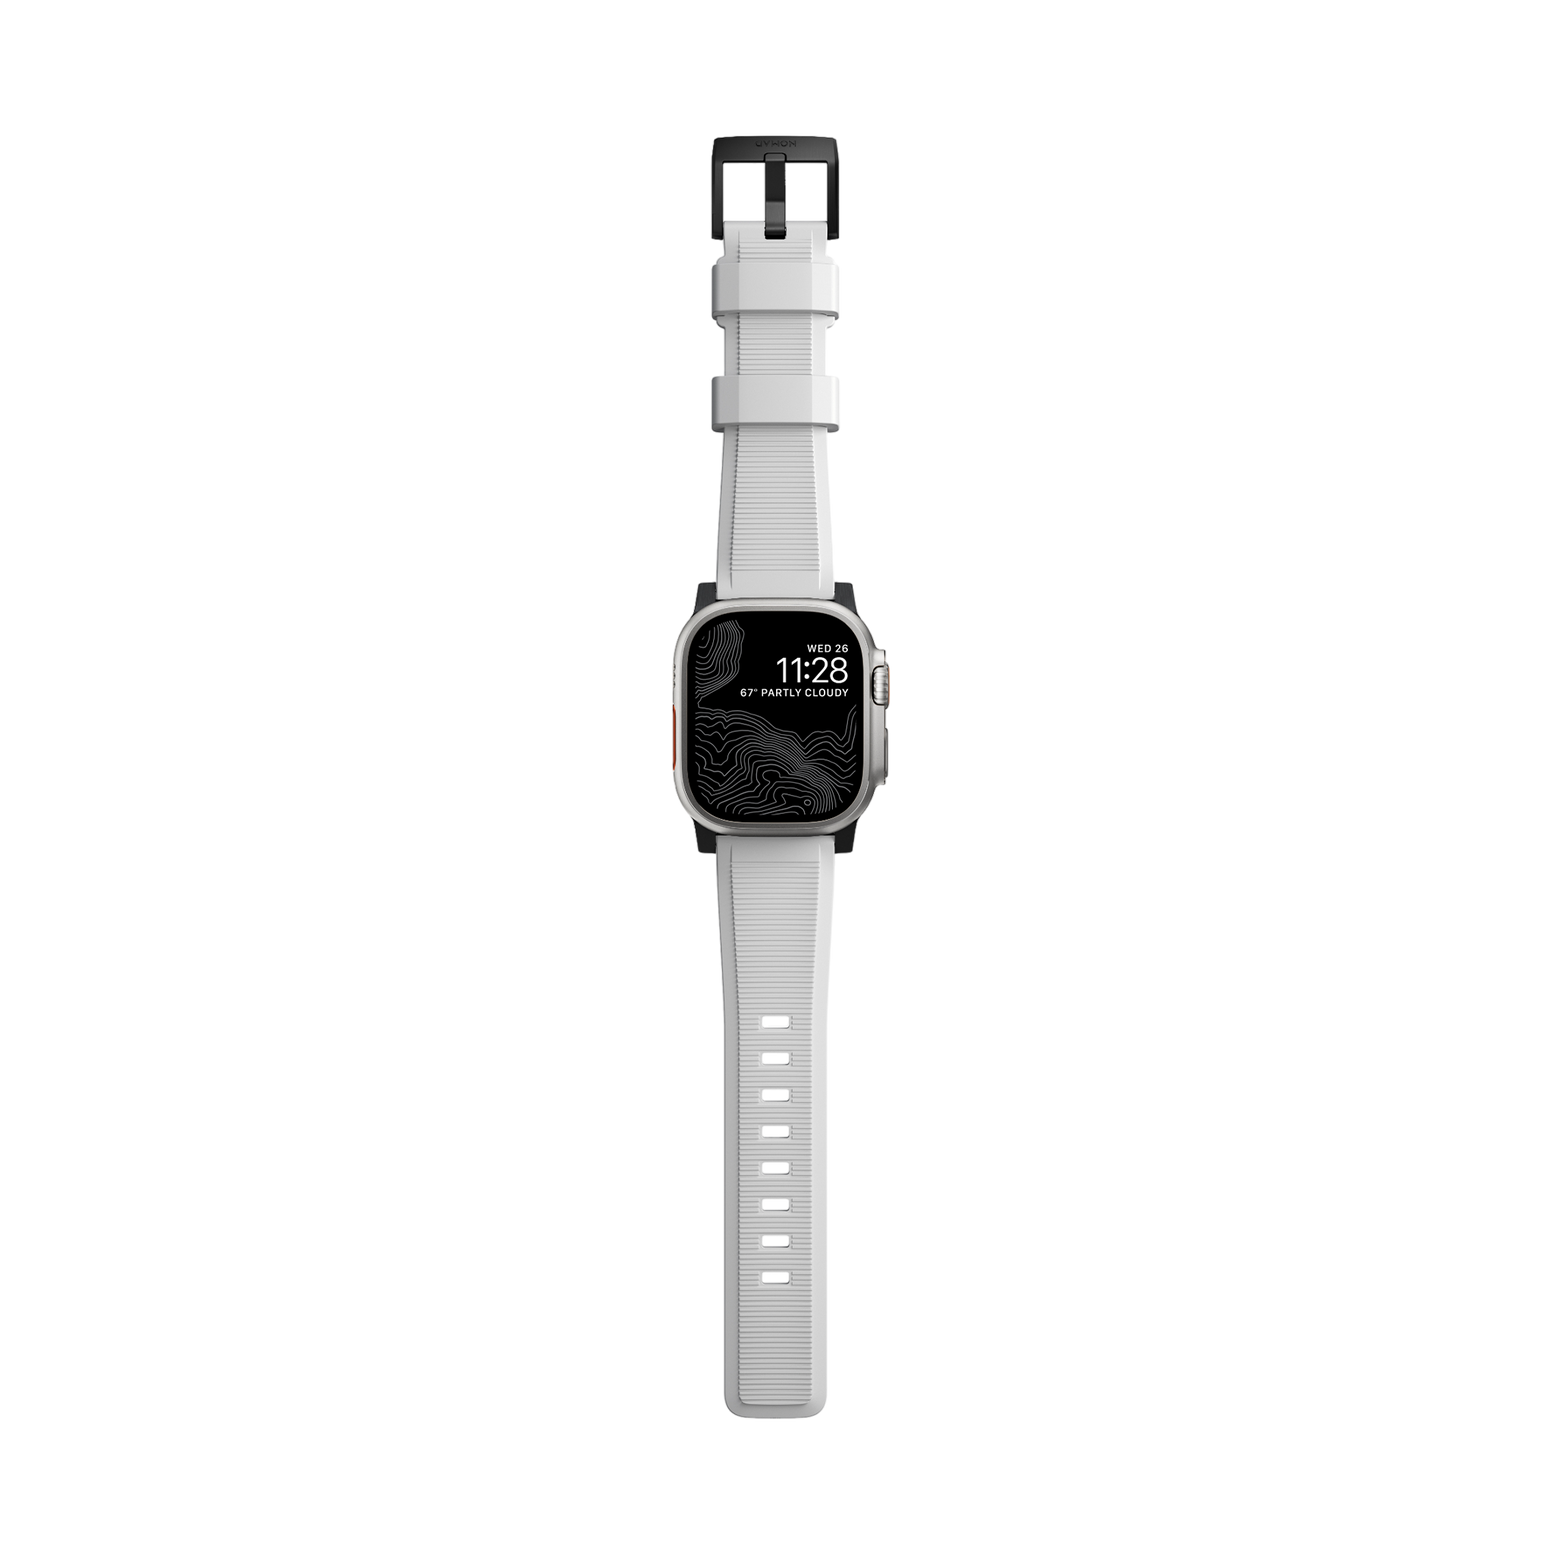 Nomad Rugged Band - 45/49mm - White - Black Hardware - Limited Edition - Exclusive to MegaMac - Discontinued